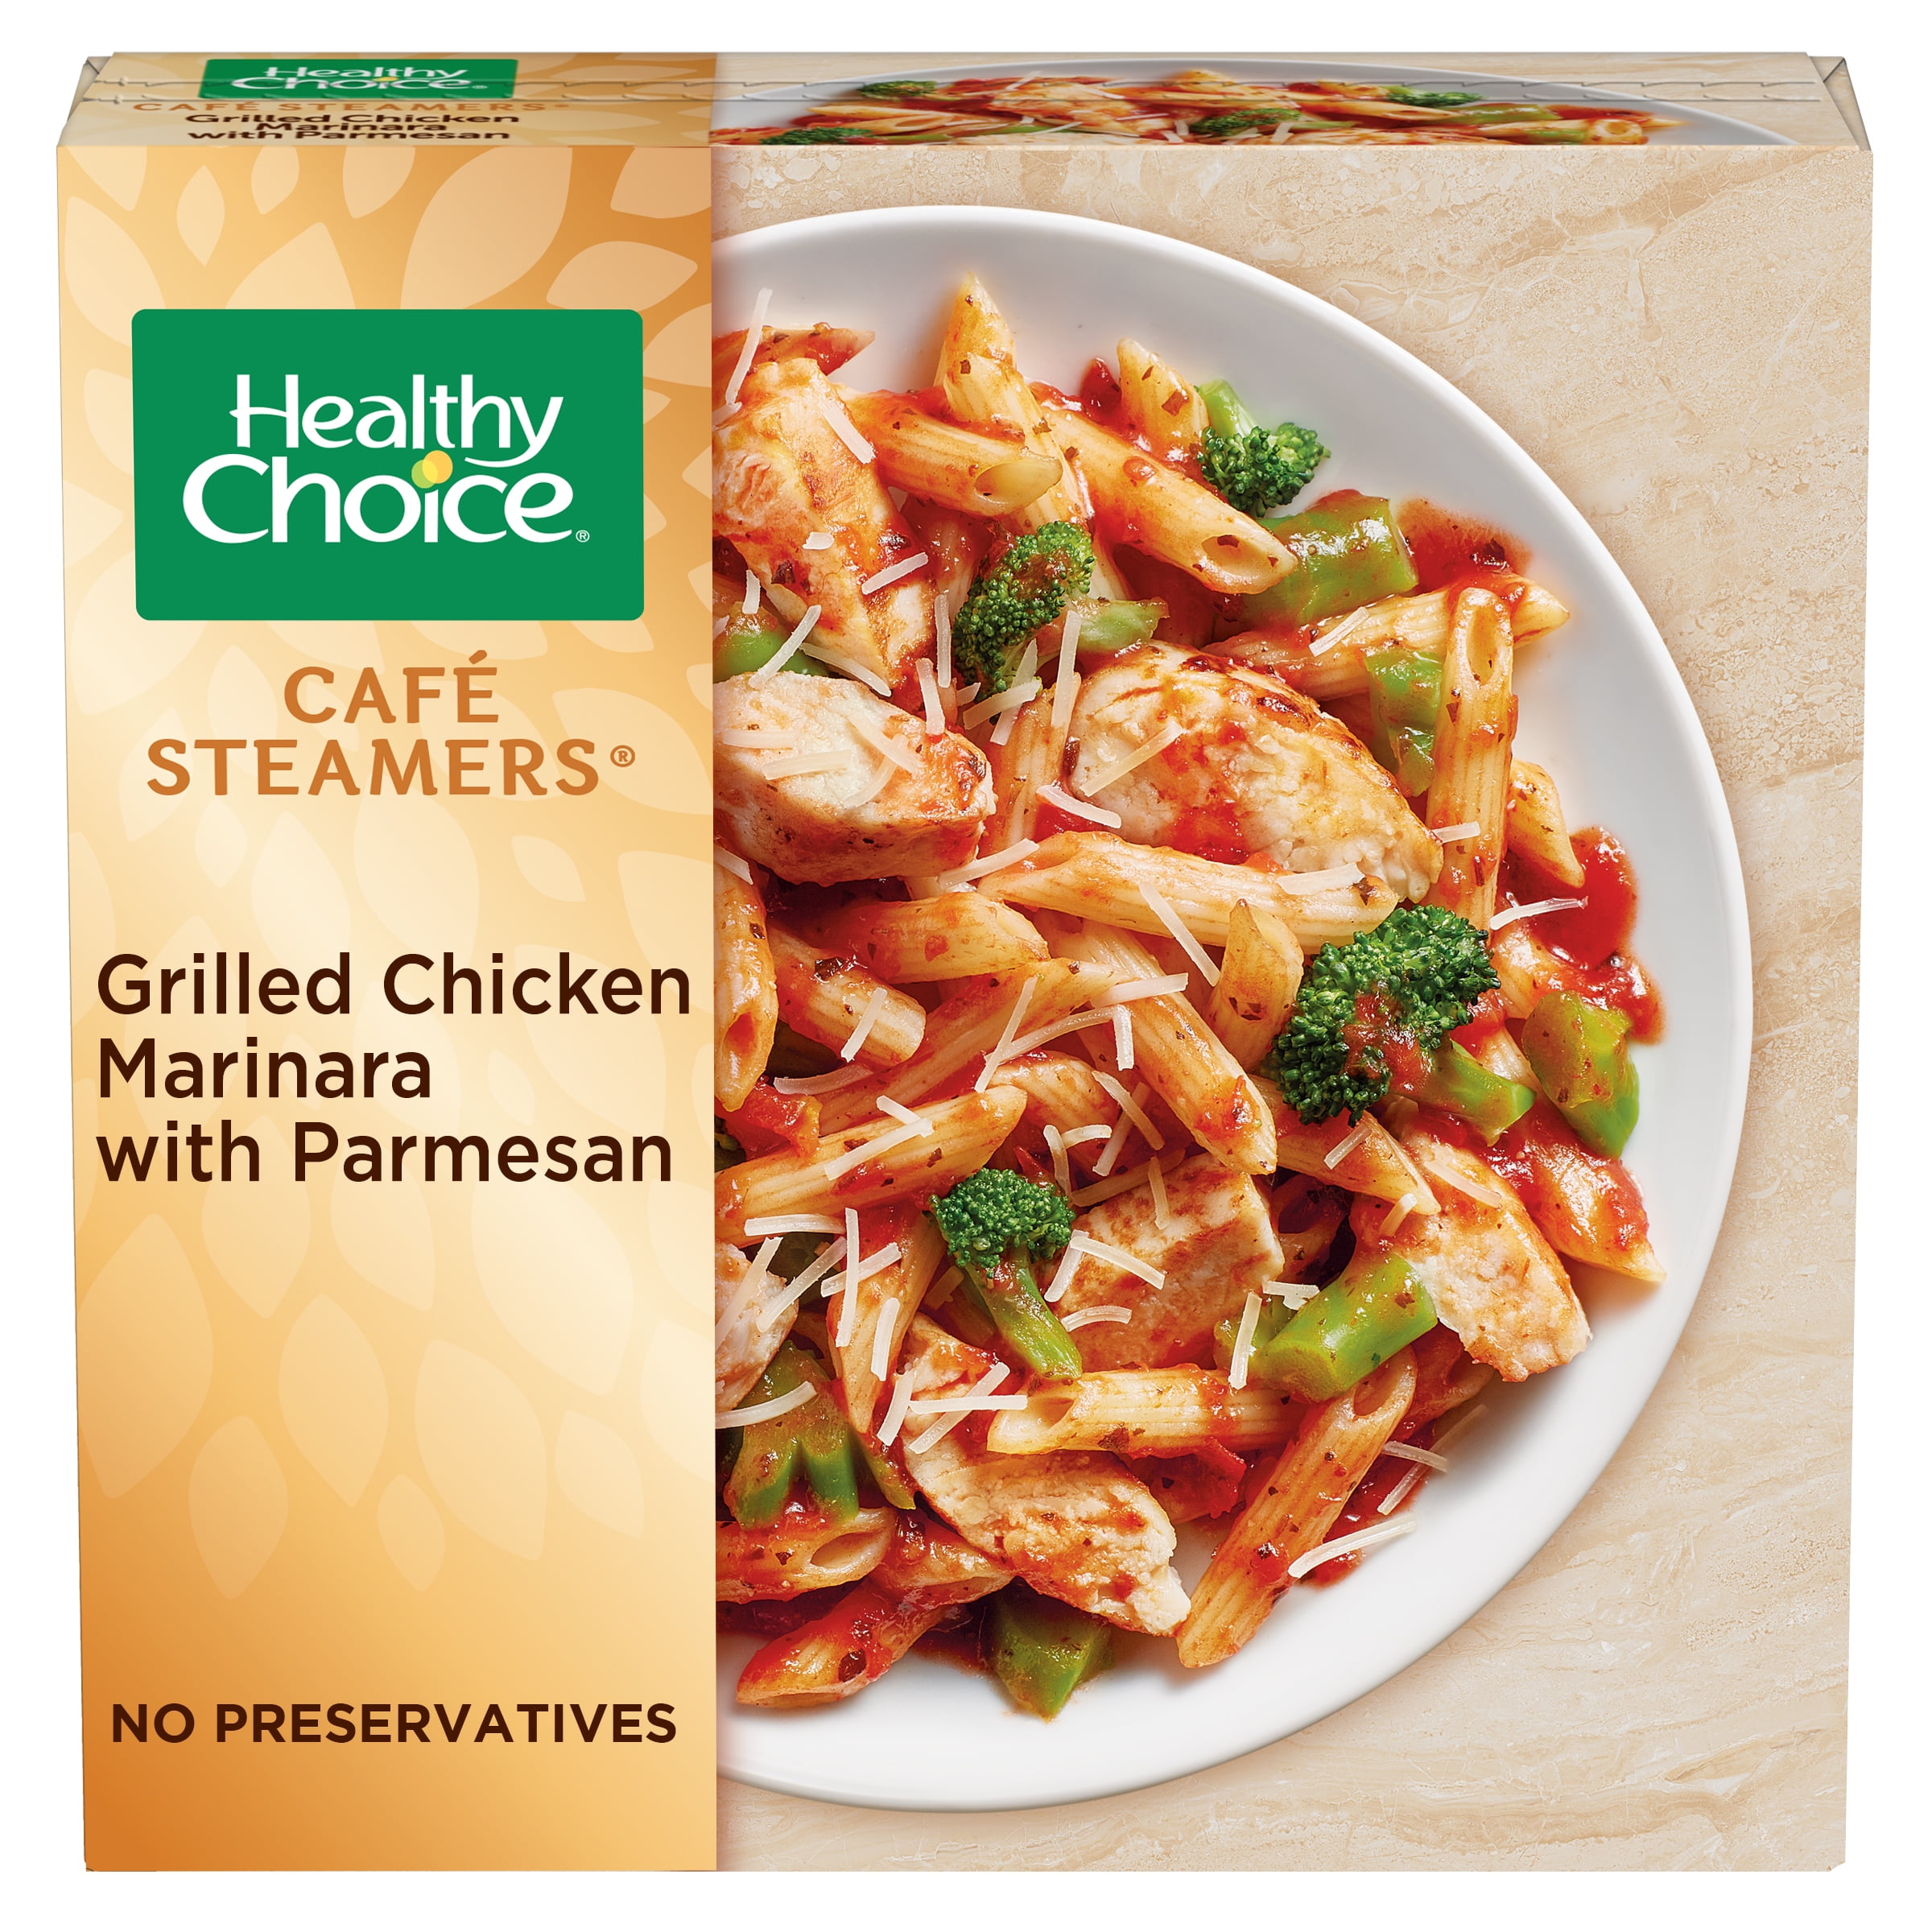 Healthy Choice Cafe Steamers Grilled Chicken Marinara with Parmesan Frozen Meal, 9.5 oz (Frozen)